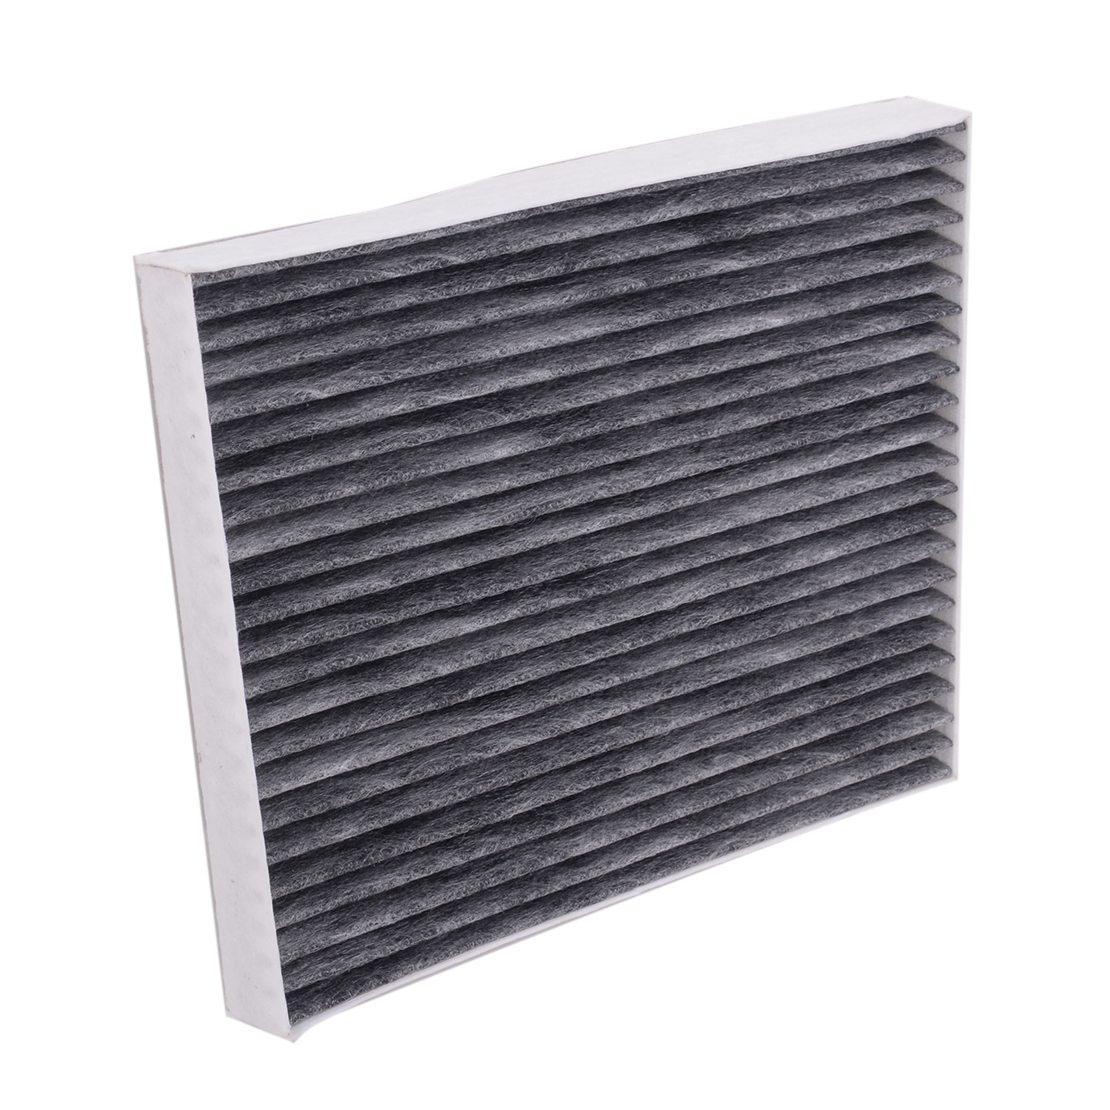 Cabin Air Filter fit for Hyundai Accent Elantra Kia Forte Rio 2018 2019 2020 | eBay Cabin Air Filter For Hyundai Elantra 2018